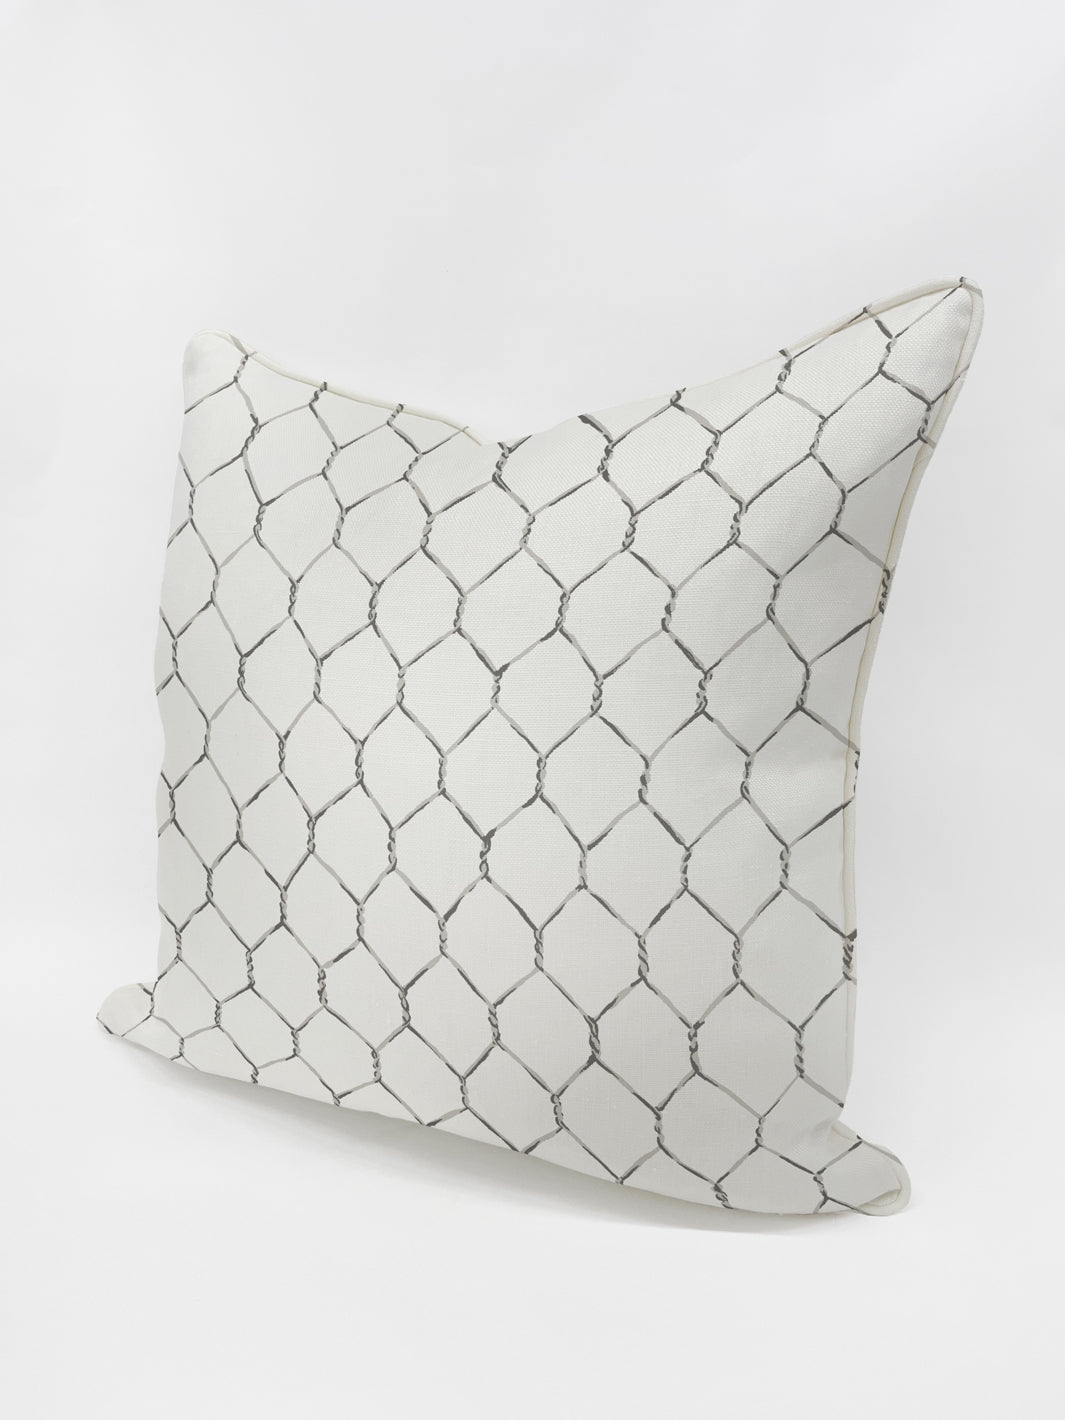 'Evelyn's Chicken Wire' Pillow by Sarah Jessica Parker - Metal on Linen